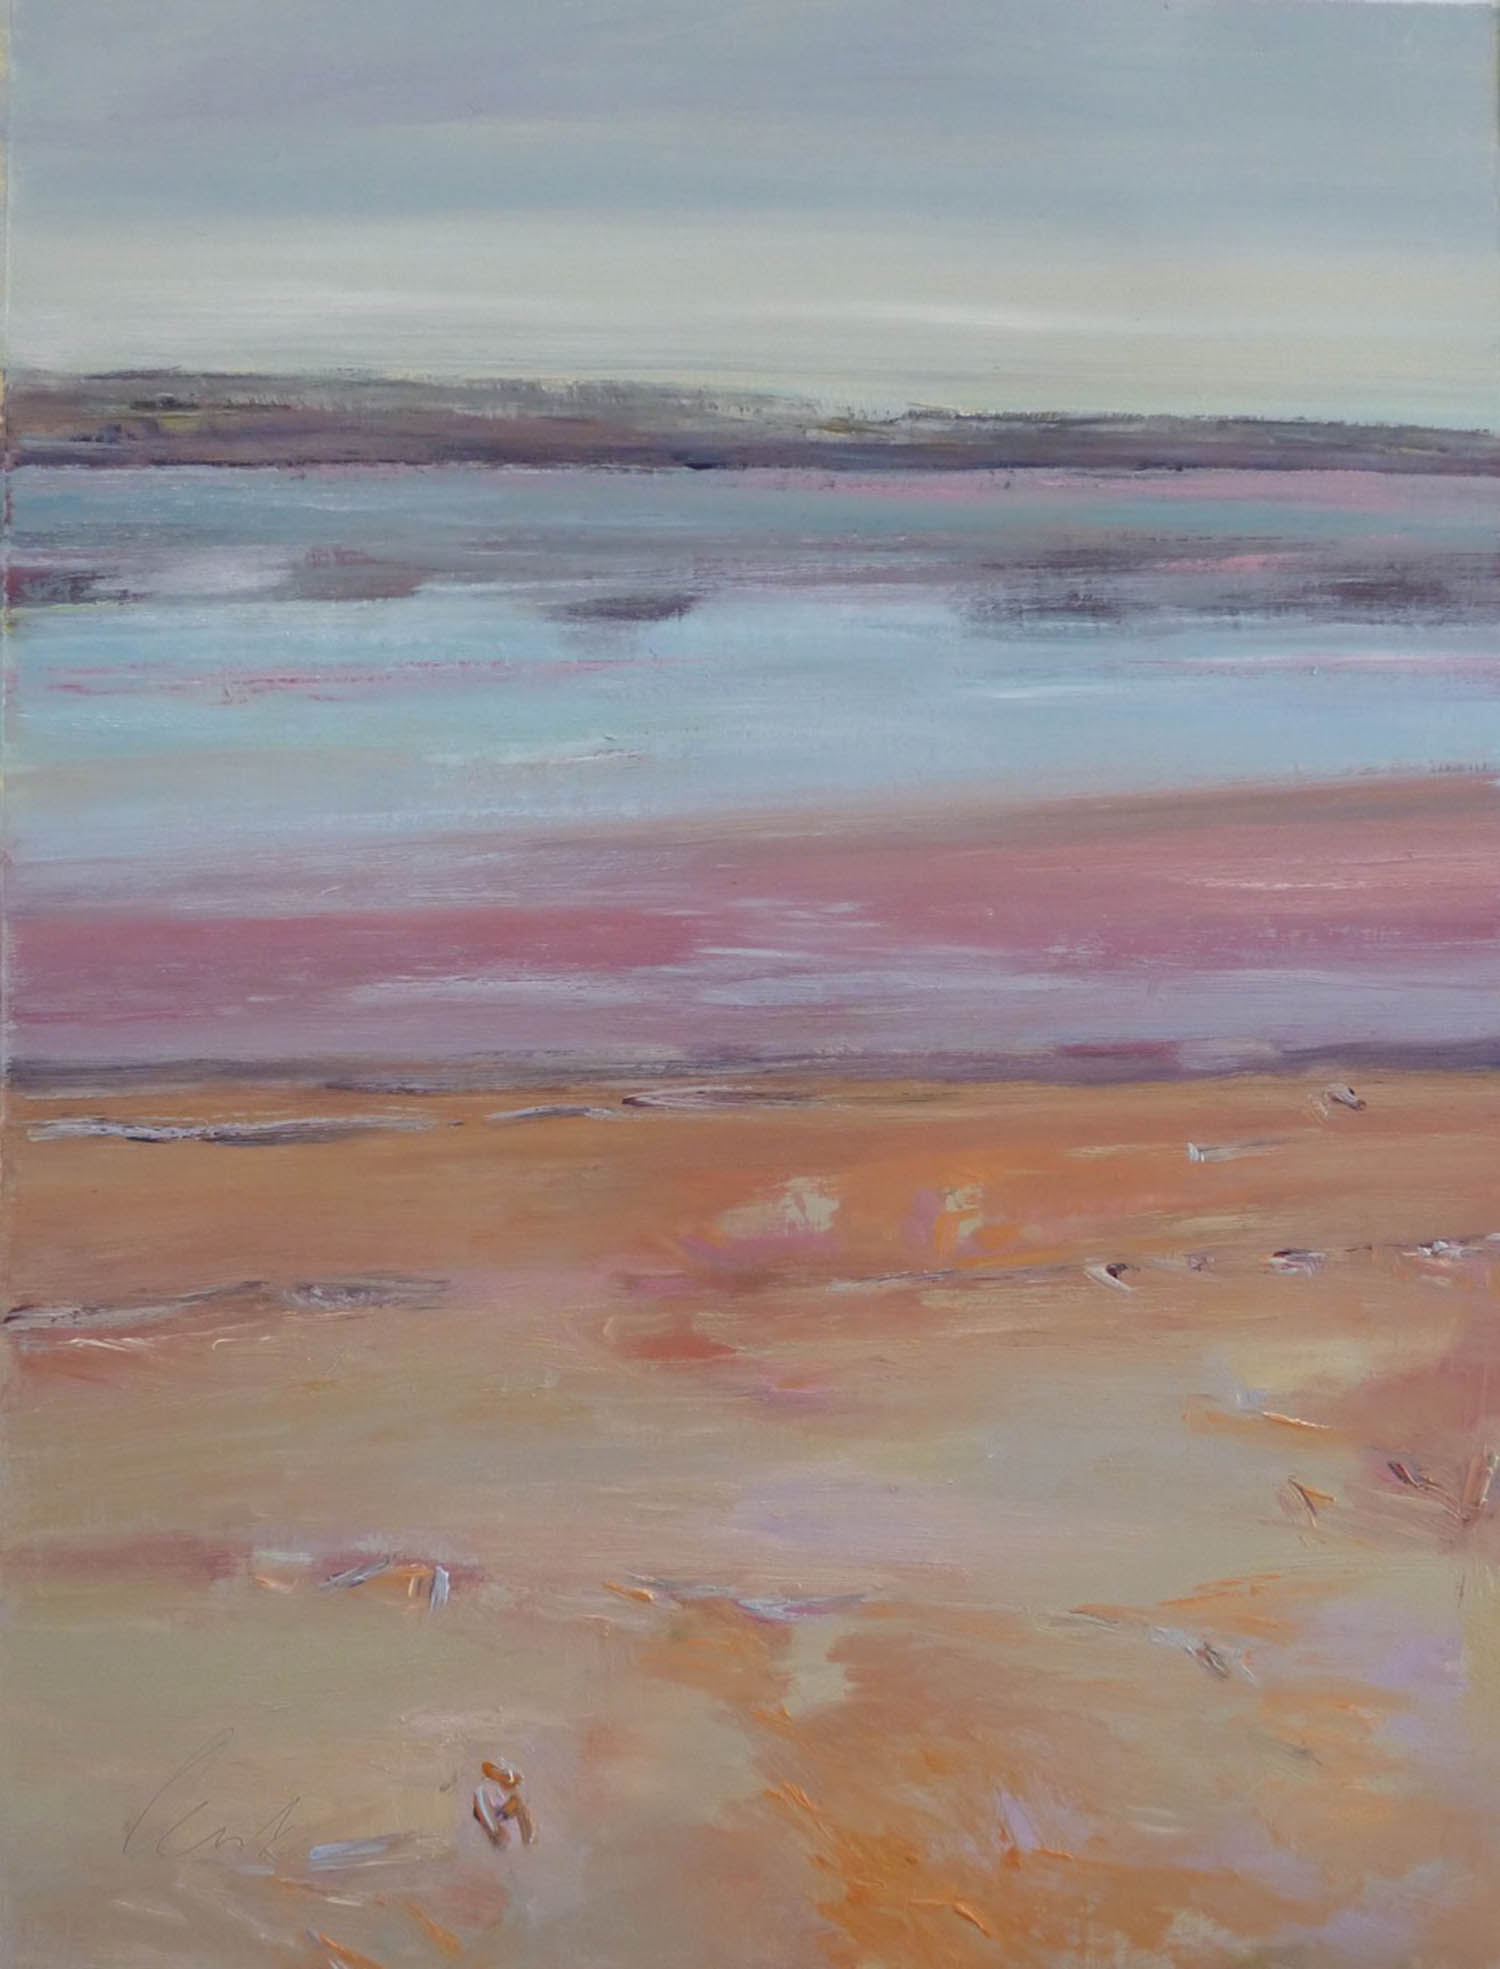  Irma Denk,  Pink Lake, Summer , 2016, 56cm x 68cm, oil on canvas paper. 